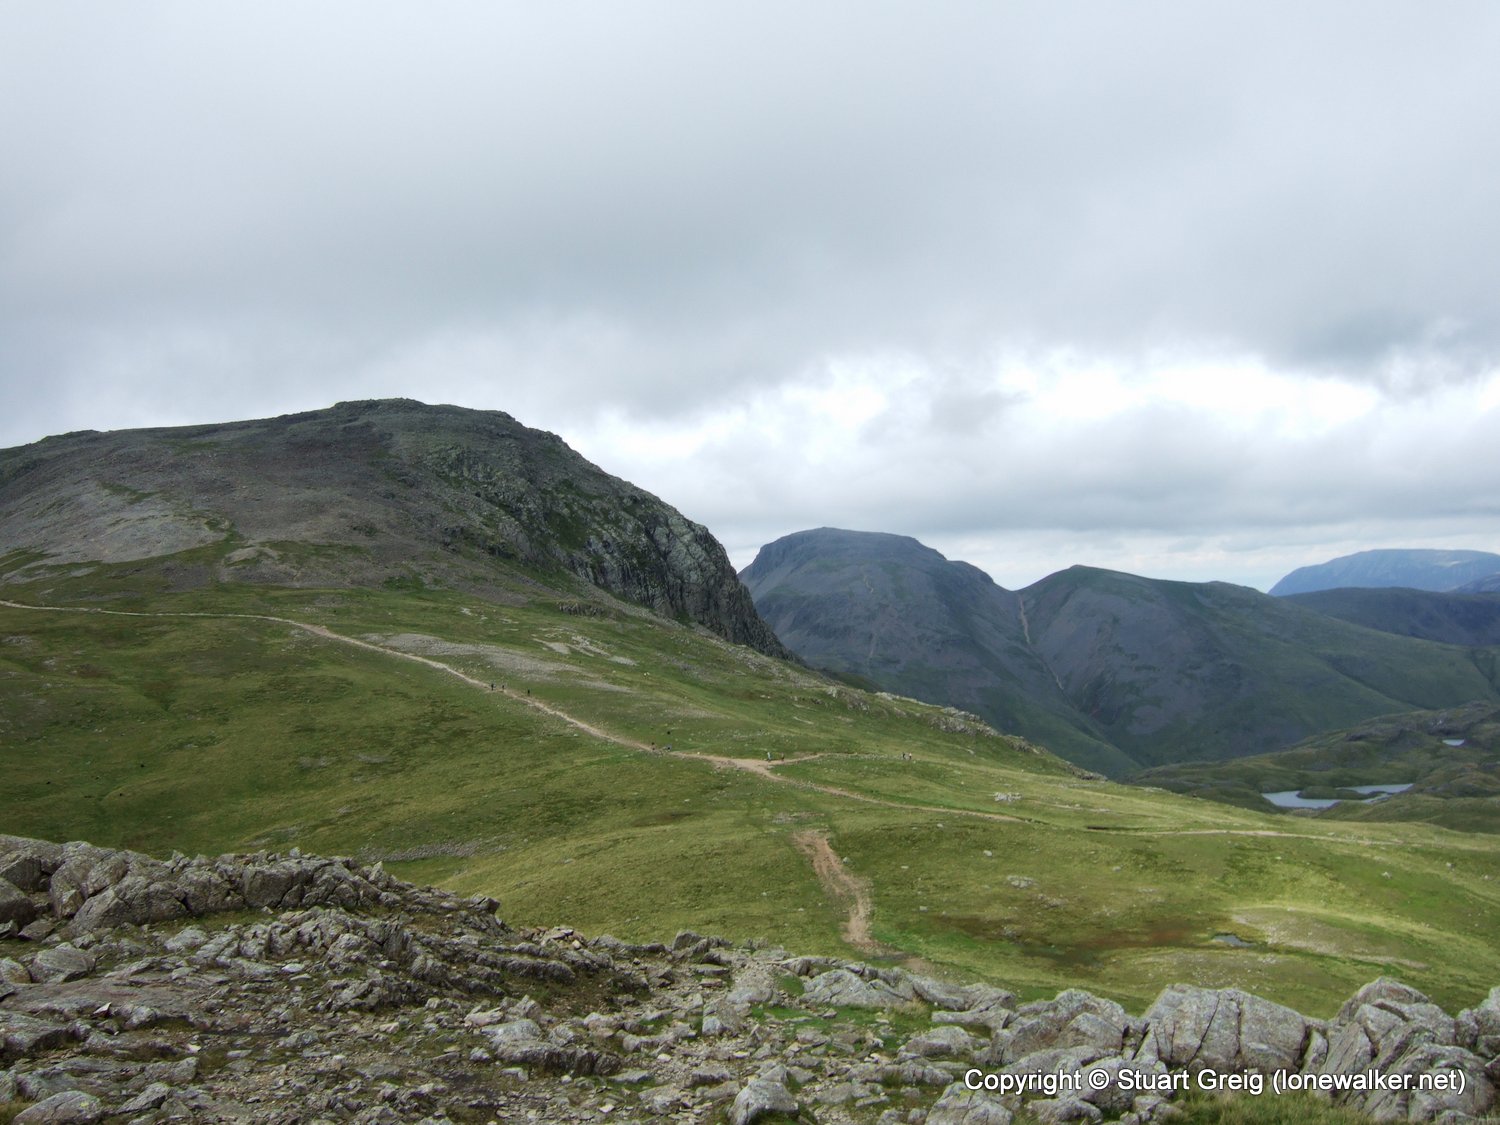 Esk Pike and Bow Fell